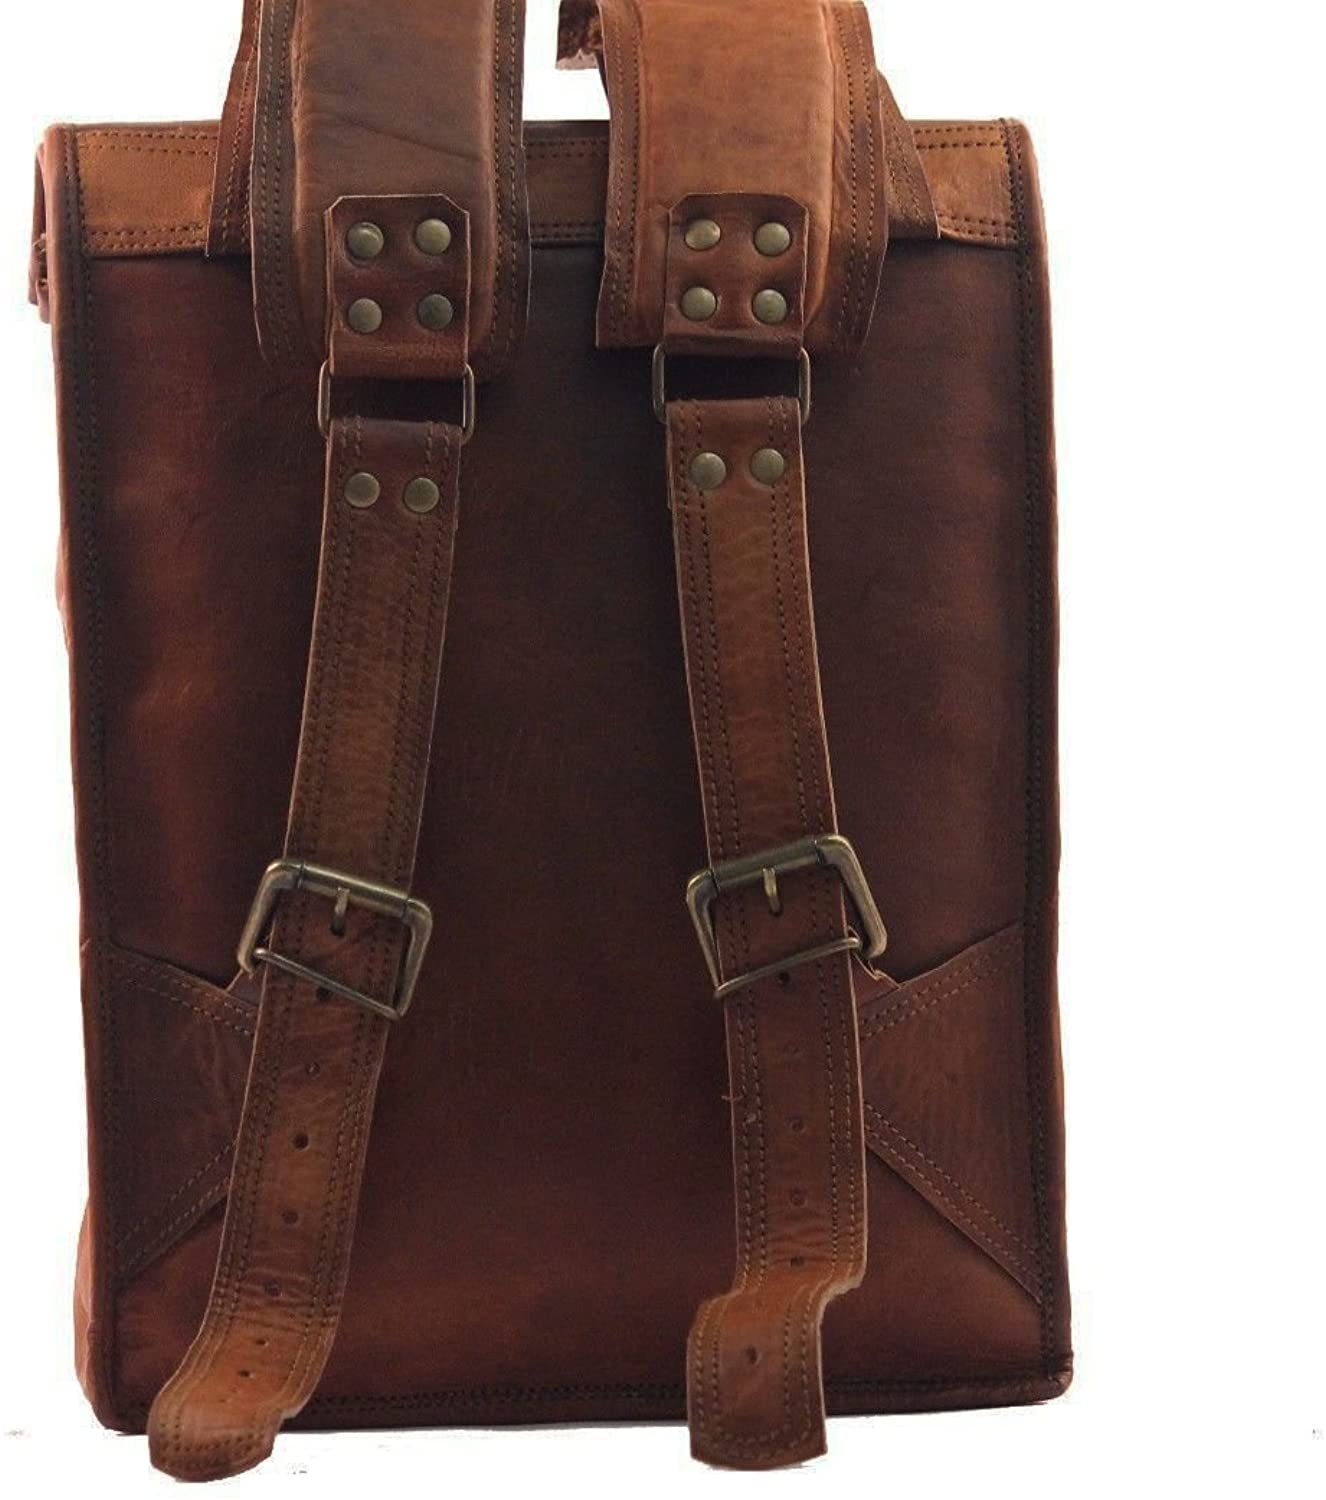 Vintage Roll Top Leather Backpack